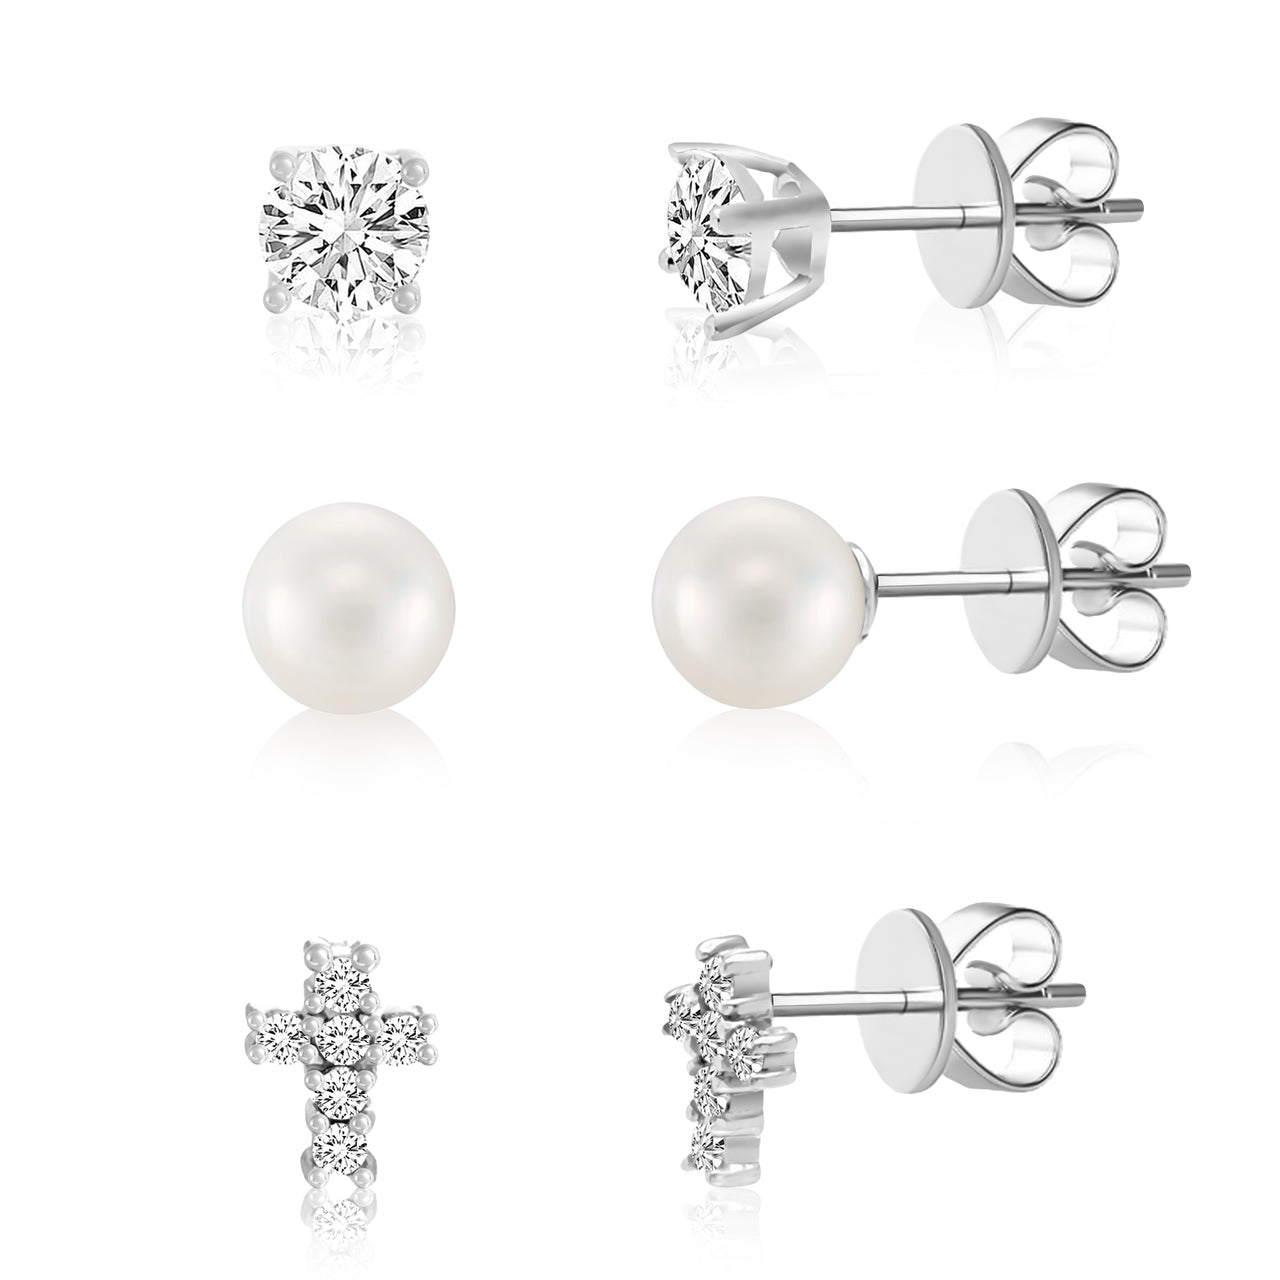 Sterling Silver Cubic Zirconia Simulated Pearl Cross, Ball and Stud Earrings Trio Set